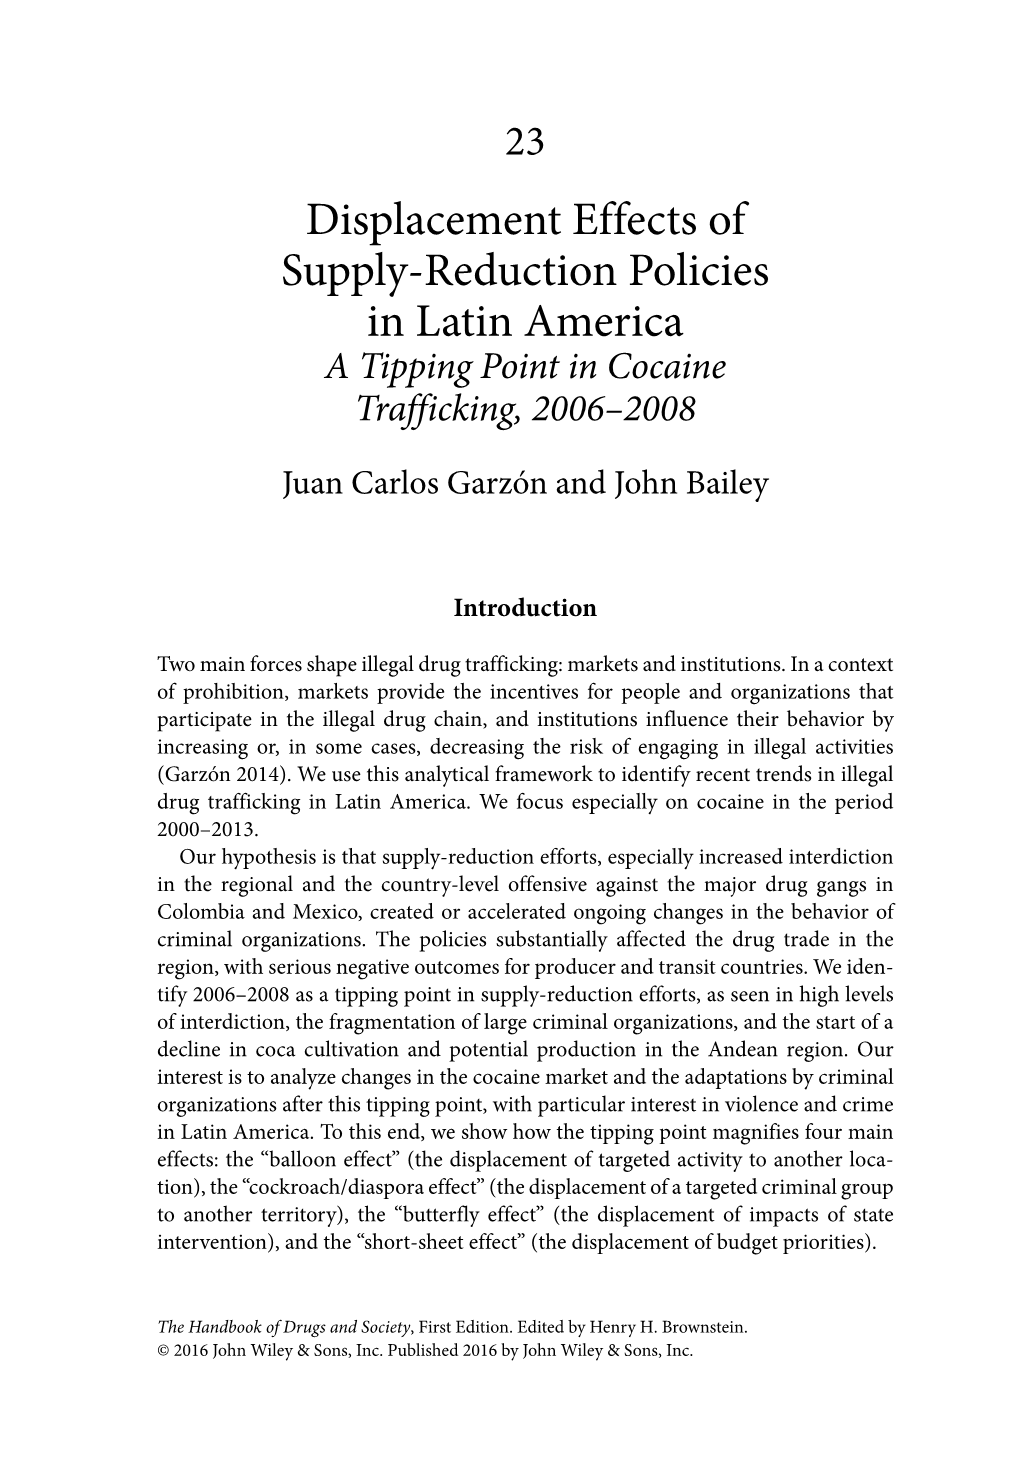 Displacement Effects of Supply-Reduction Policies in Latin America 483